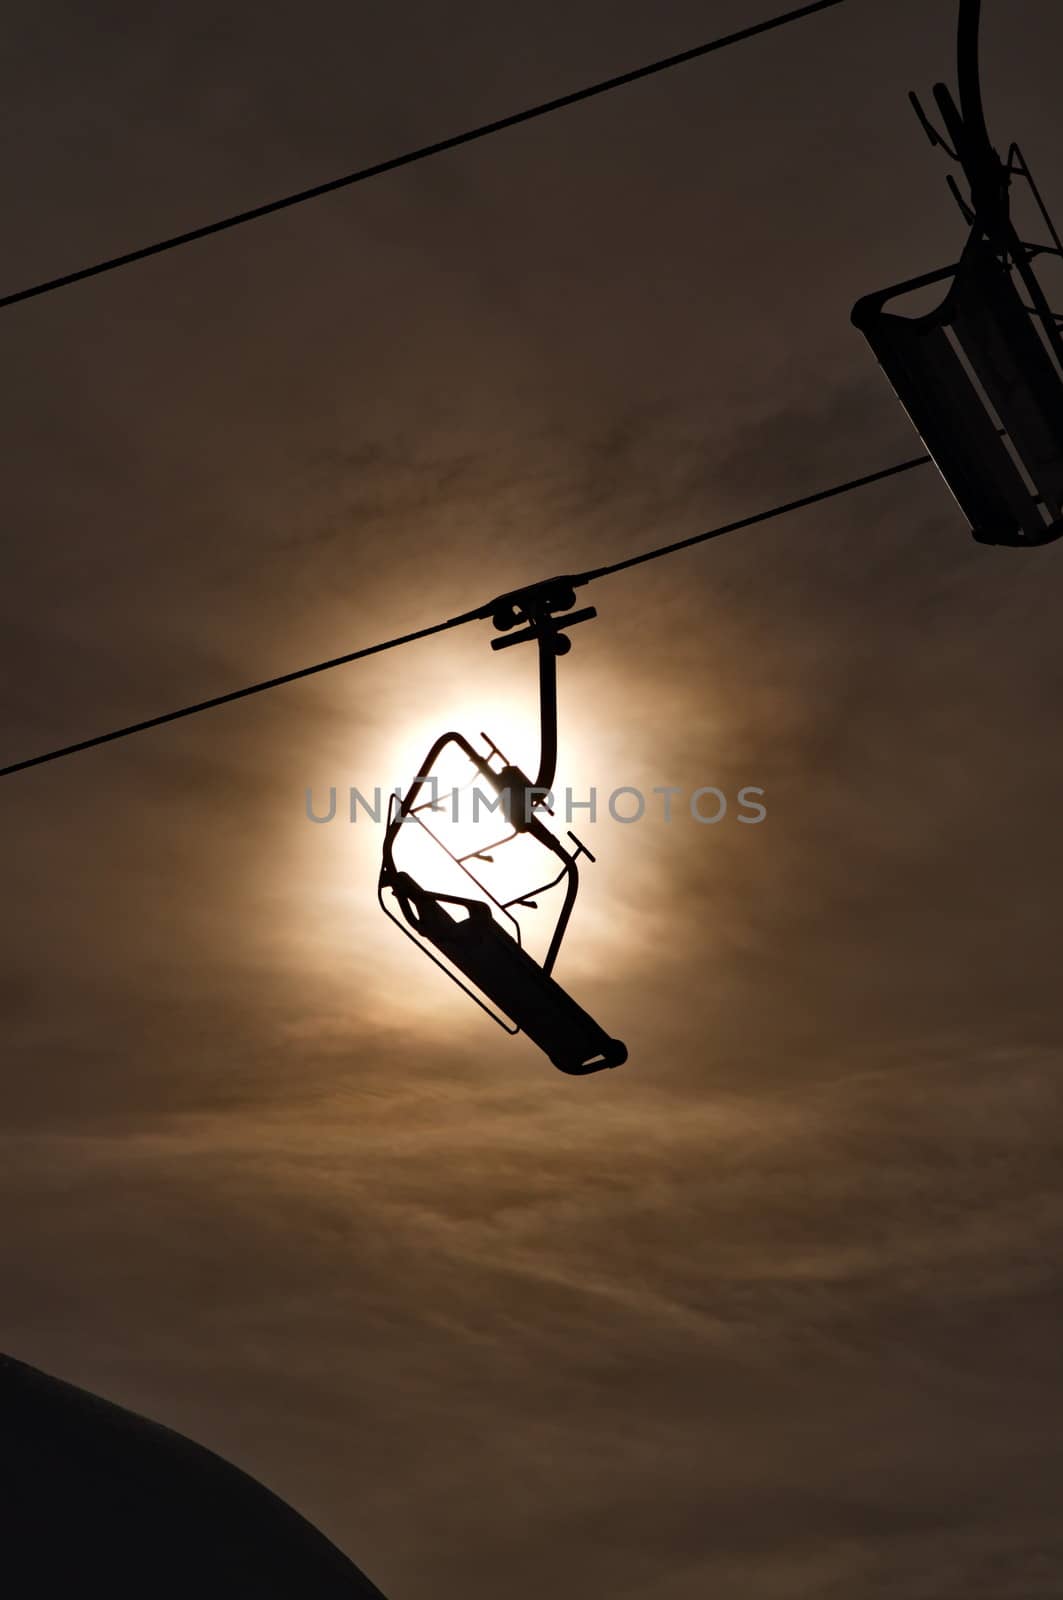 Empty ski lift silhouette by anderm